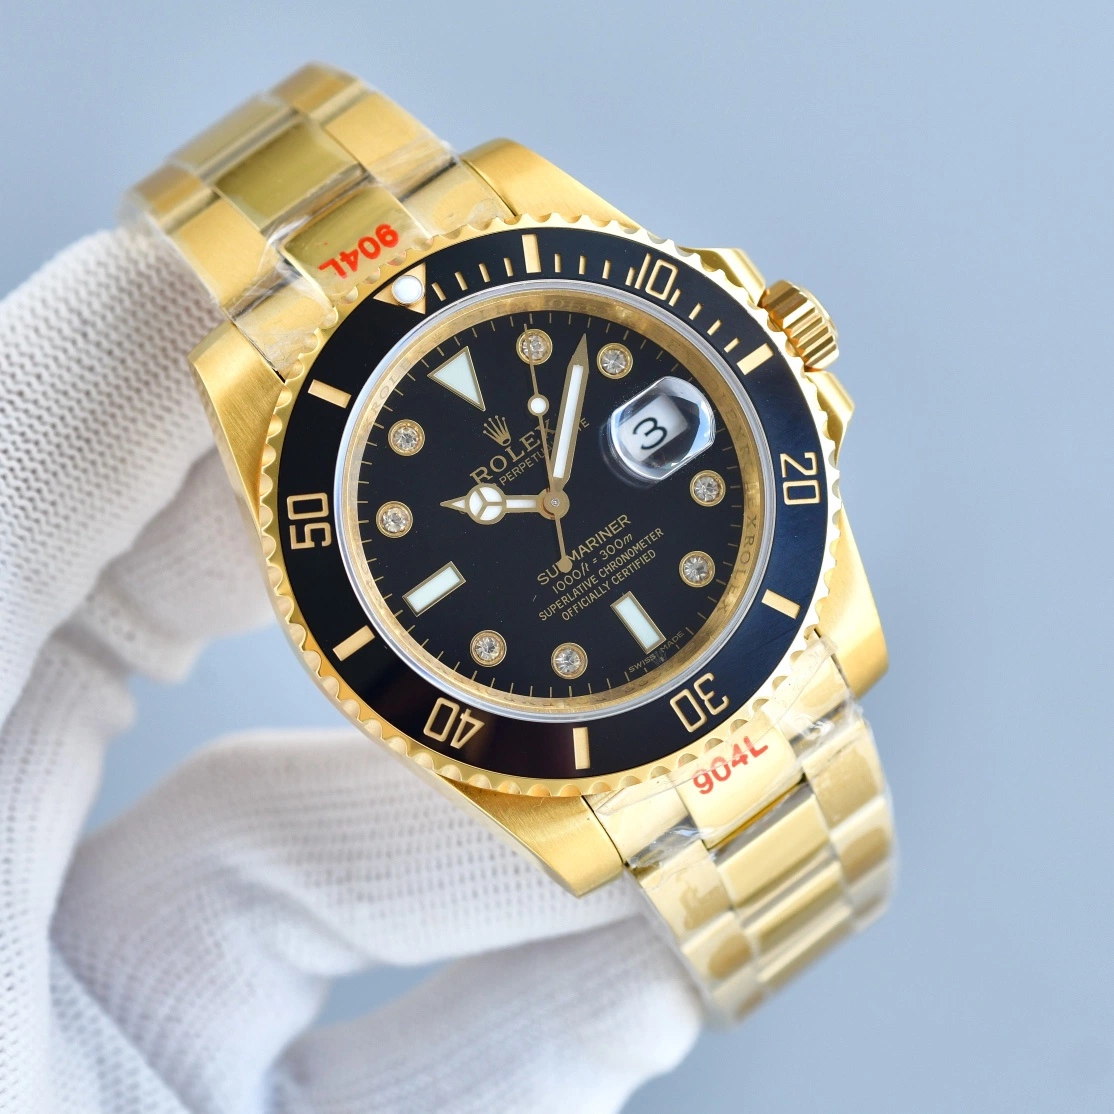 Mechanical Automatic Sports Casual 3235 3135 Movement S-Ubmarine Dayto-Na a-Udemars P-Iguet R-Ichard Mille Noob Clean Factory C-Artier Watch Sell RO Lex Watches